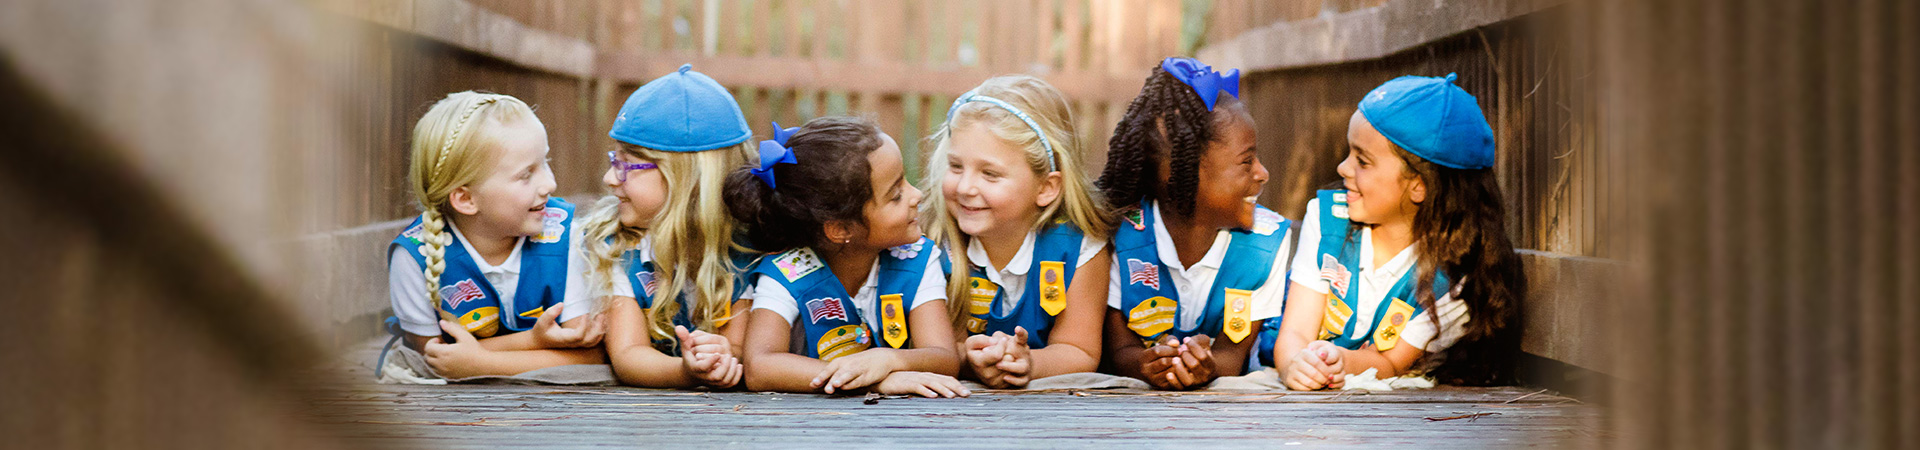  a group of Girl Scout Daisies in uniform 